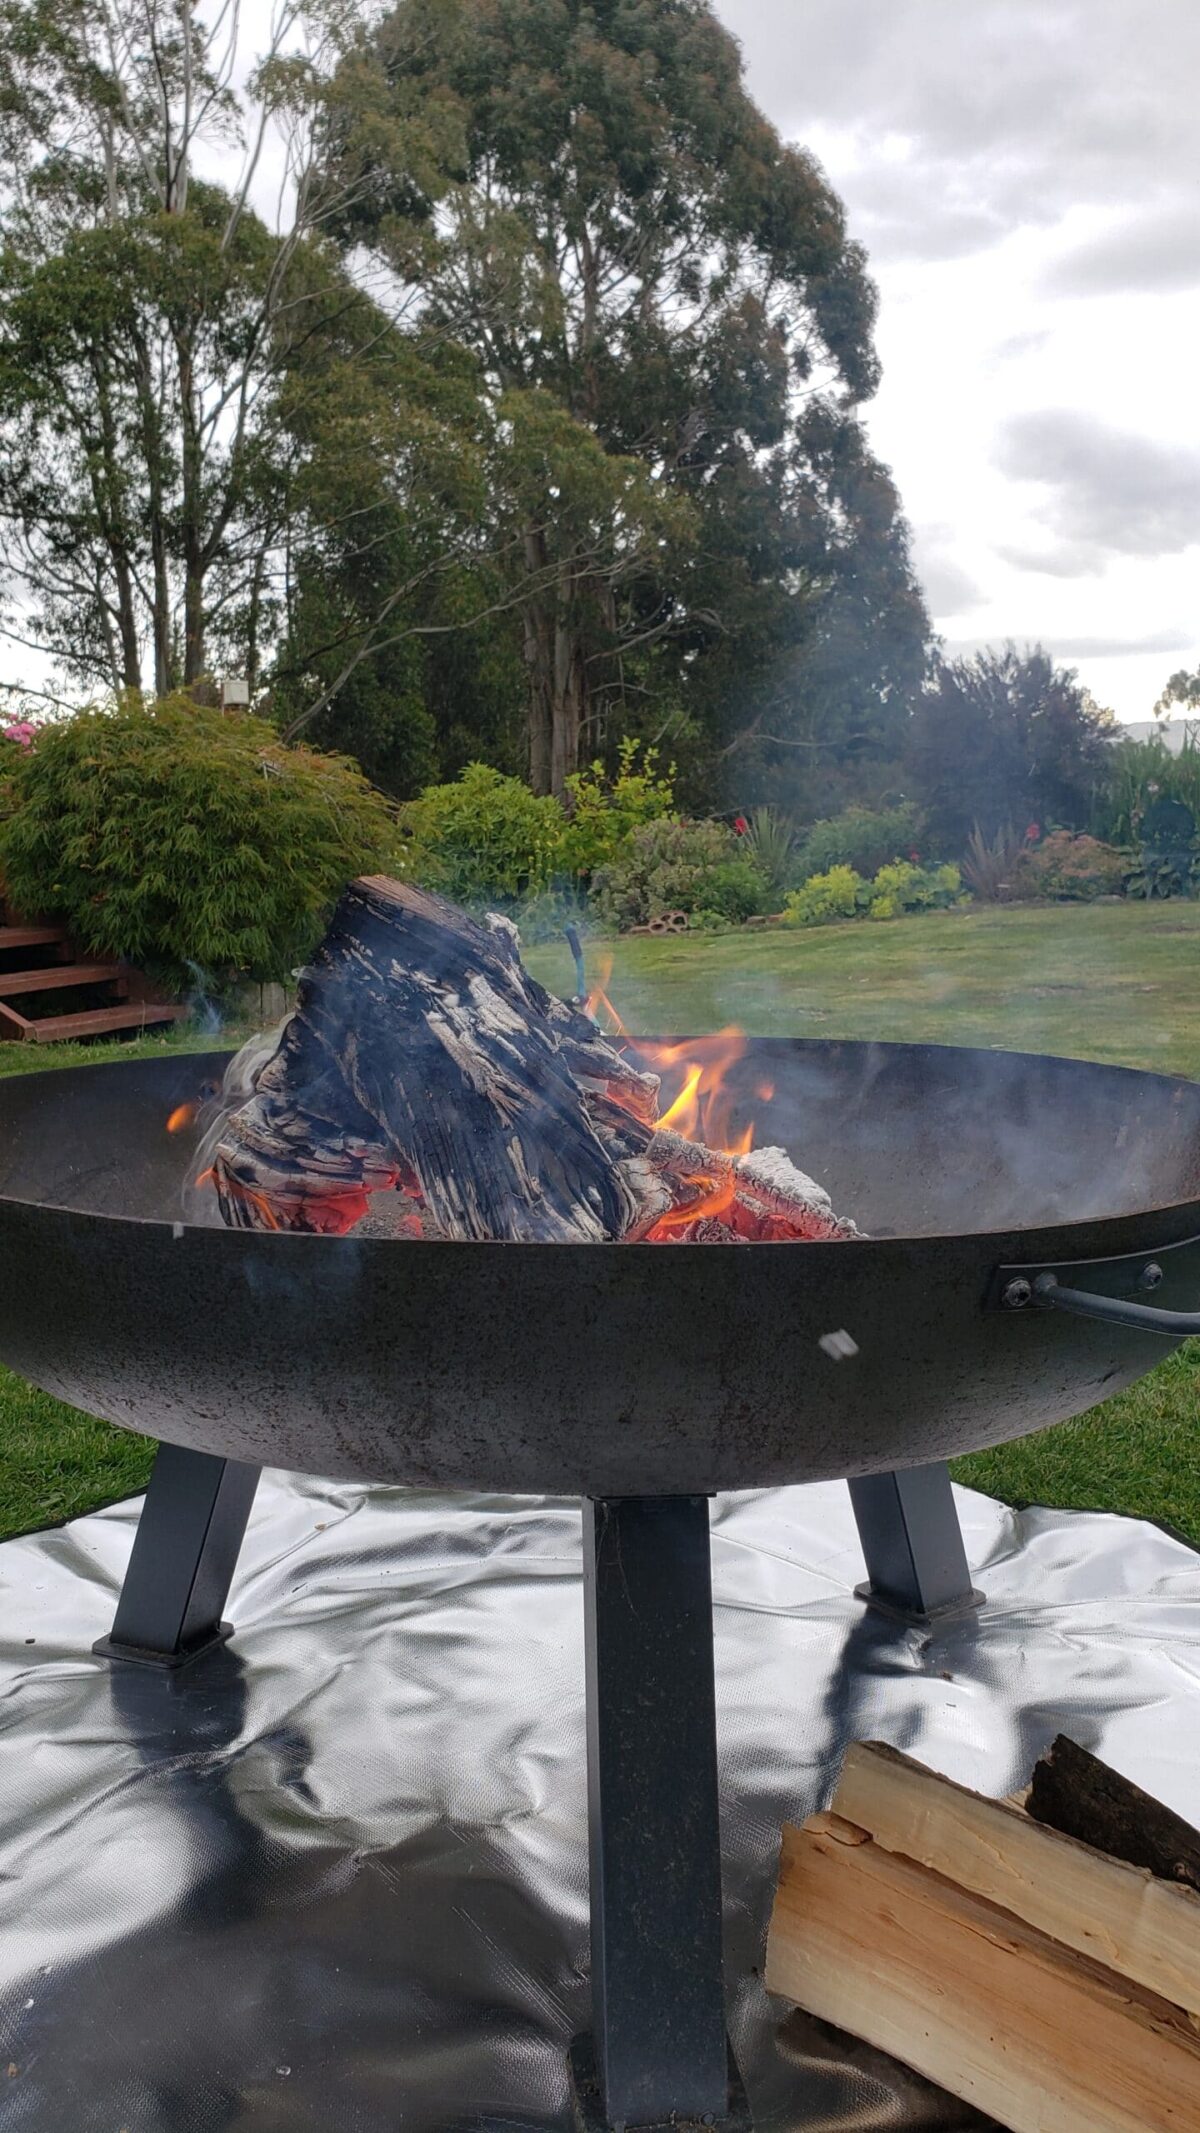 Fire Pit On Grass 5 Best Ways To, How To Use Fire Pit Without Killing Grass